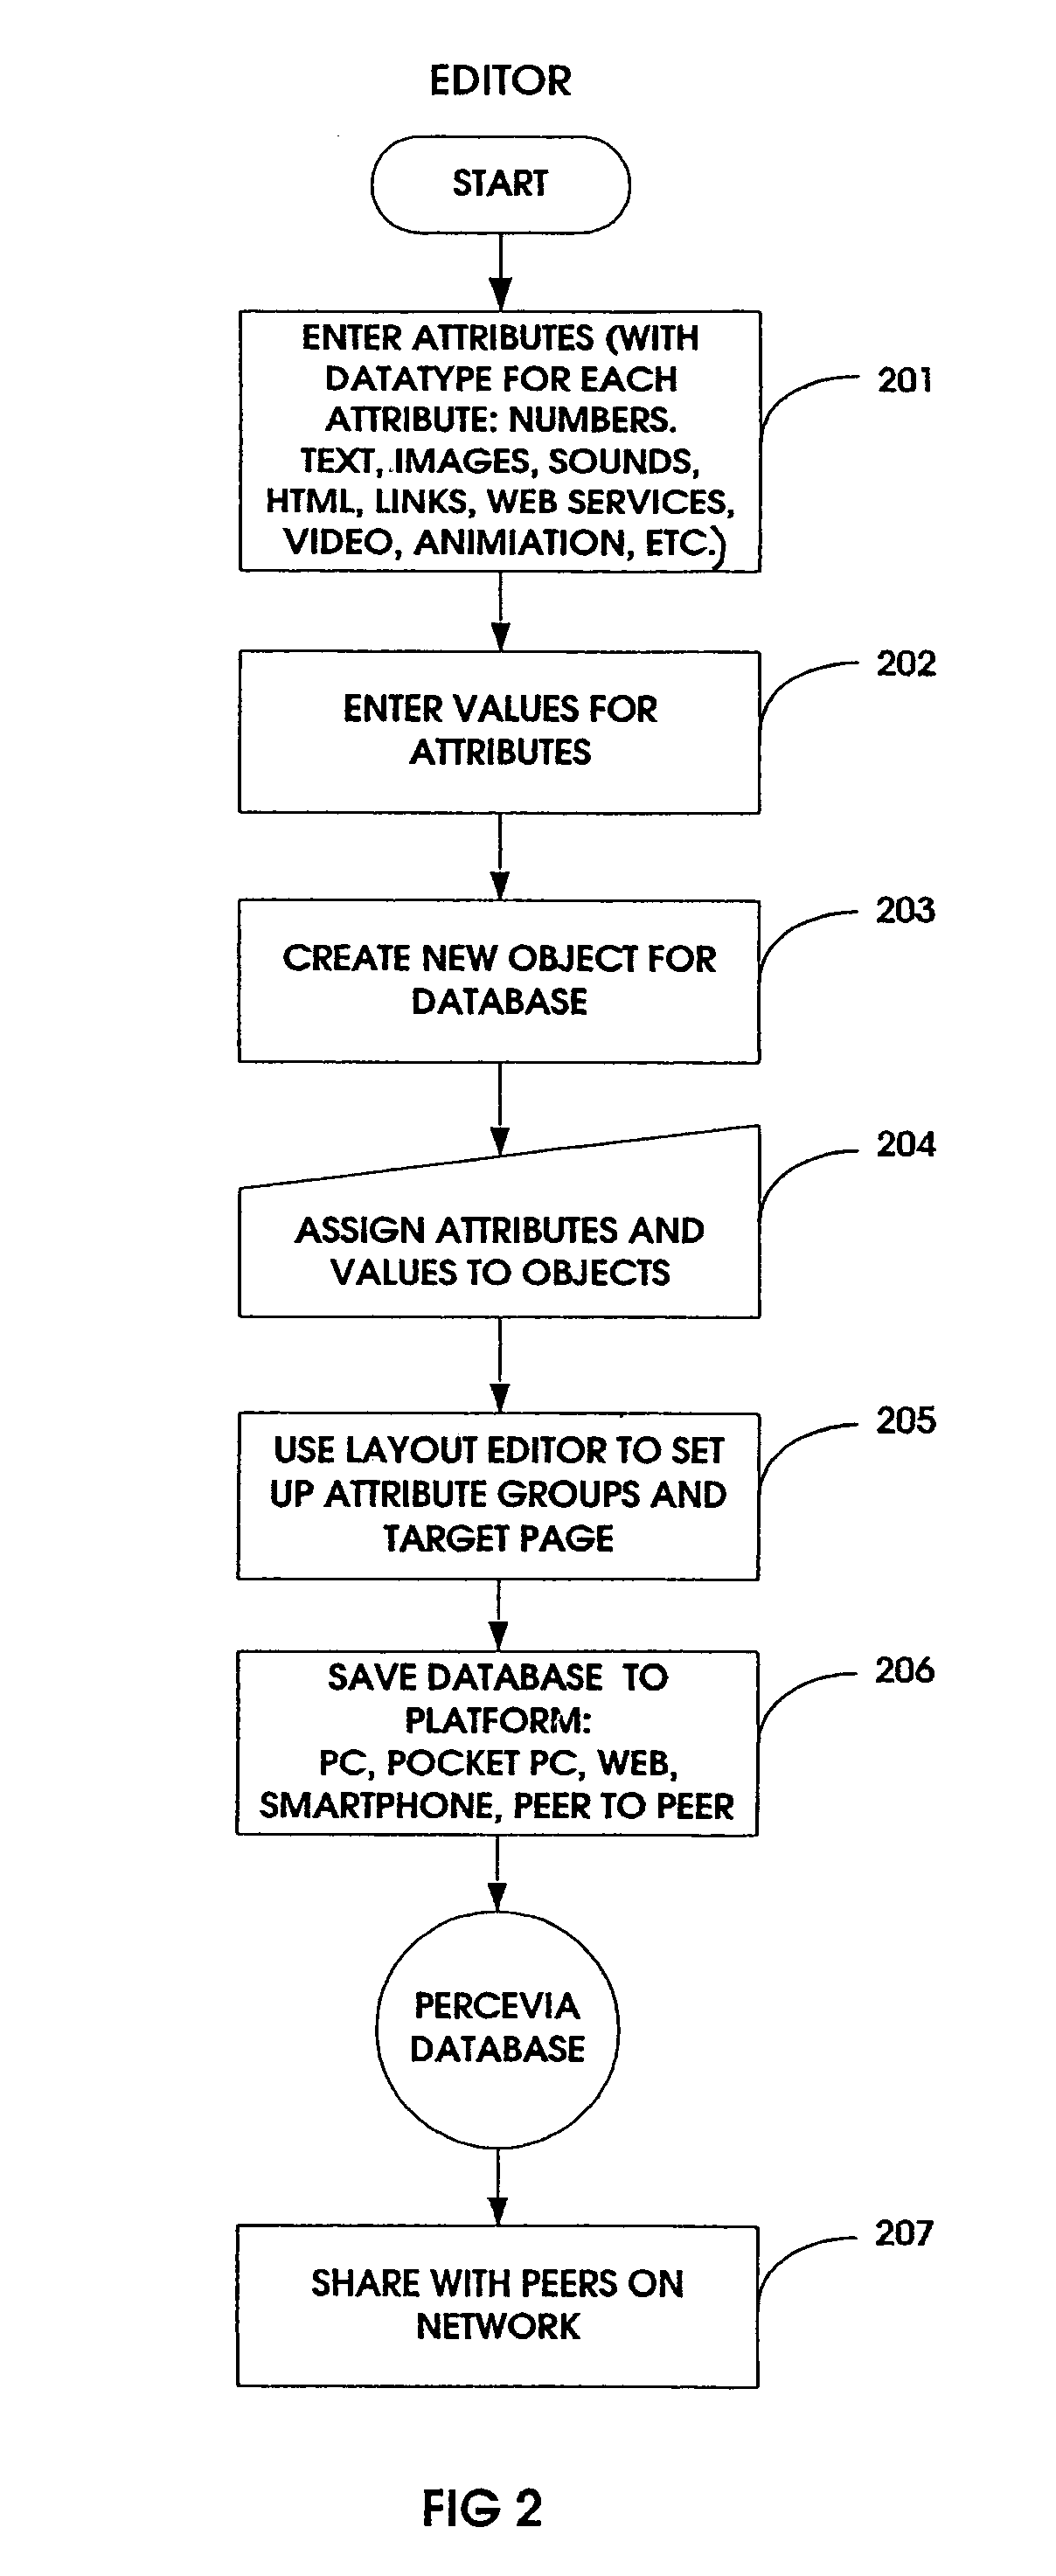 Method and system for portable and desktop computing devices to allow searching, identification and display of items in a collection